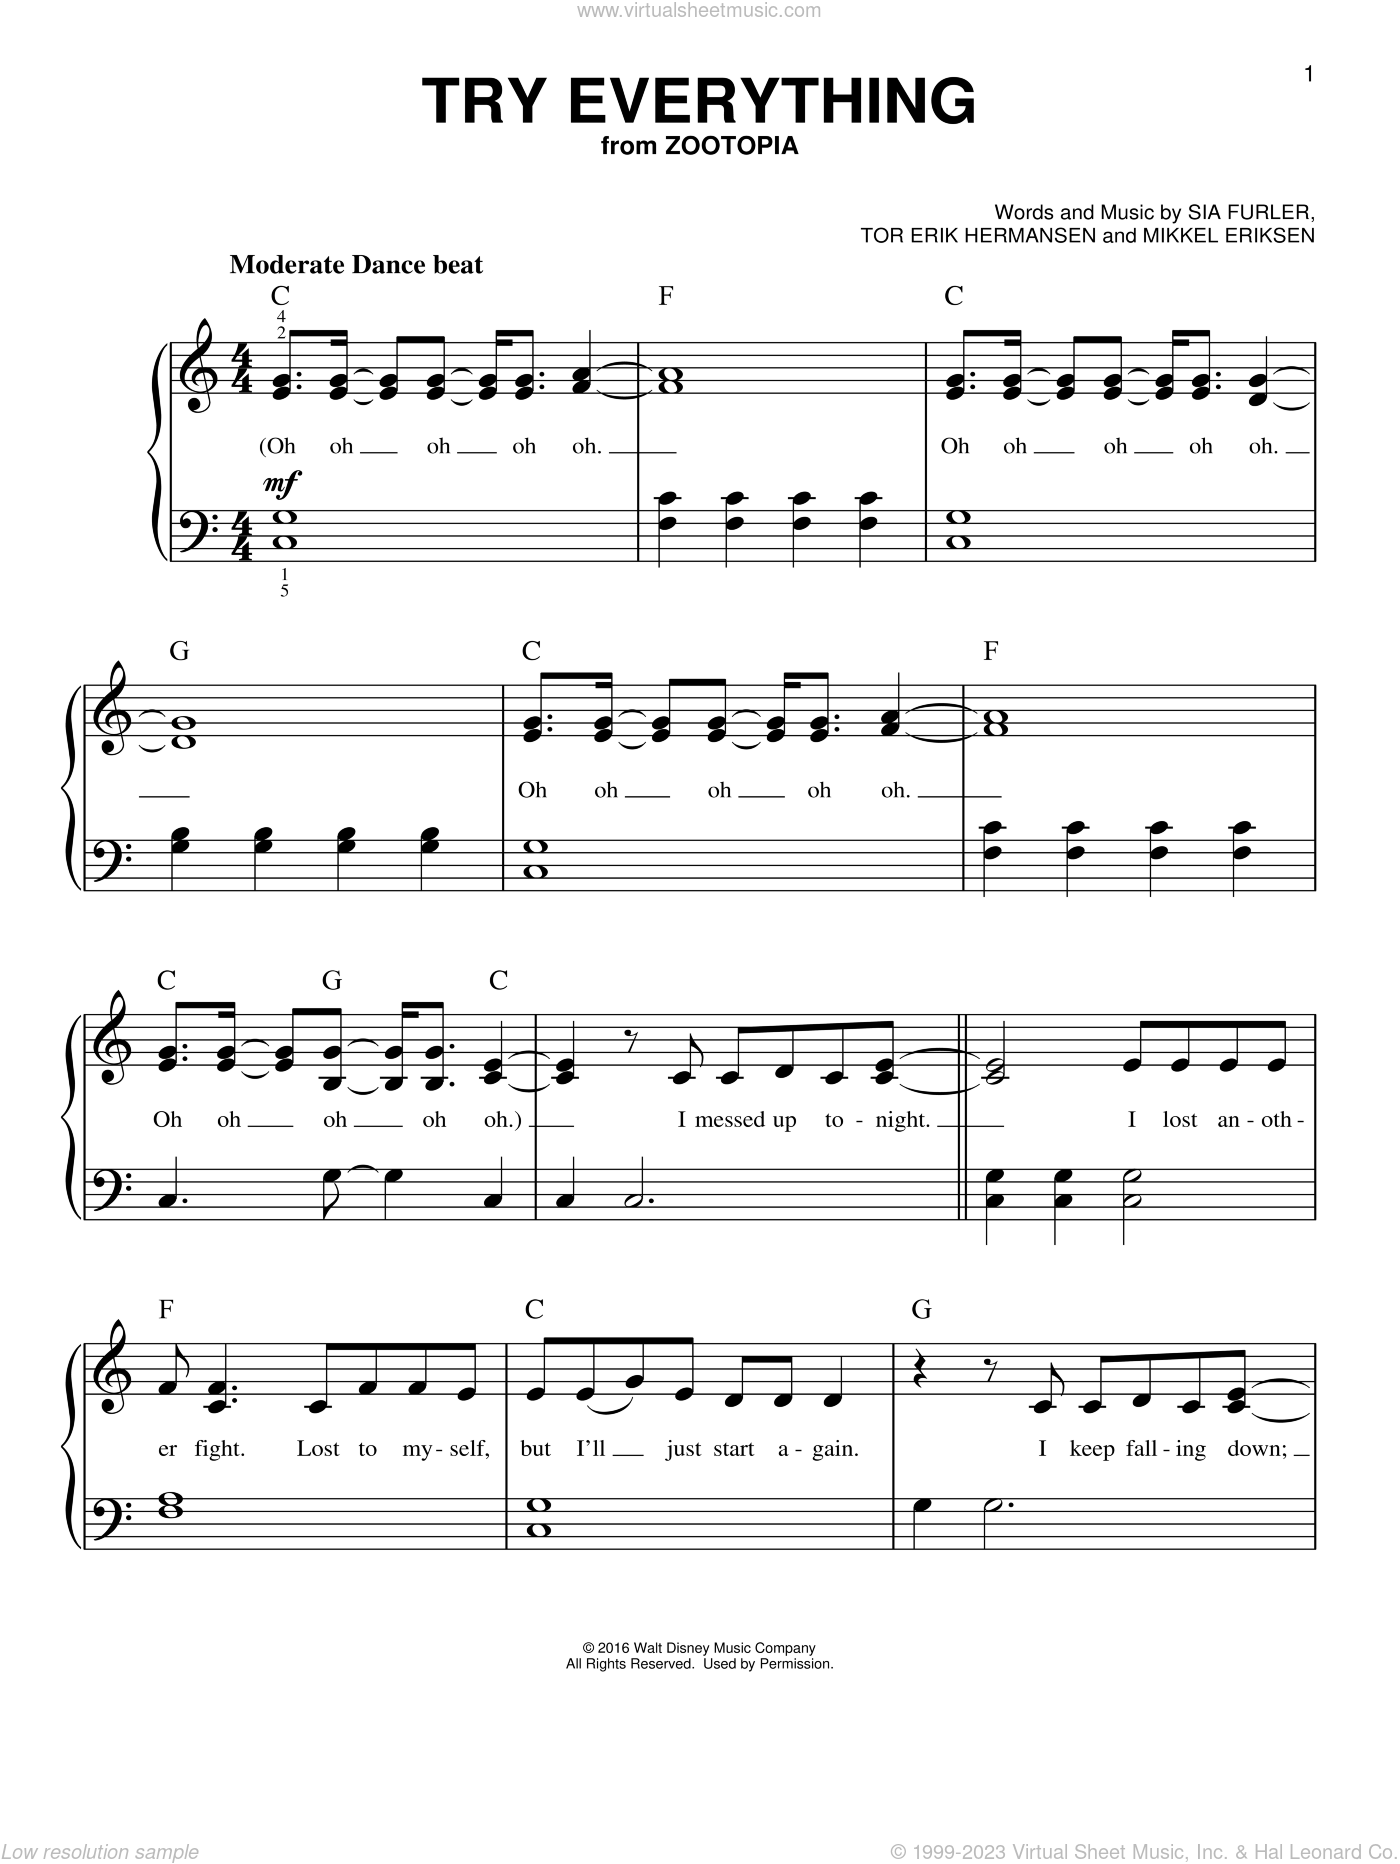 Shakira - Try Everything sheet music for piano solo [PDF]1276 x 1650